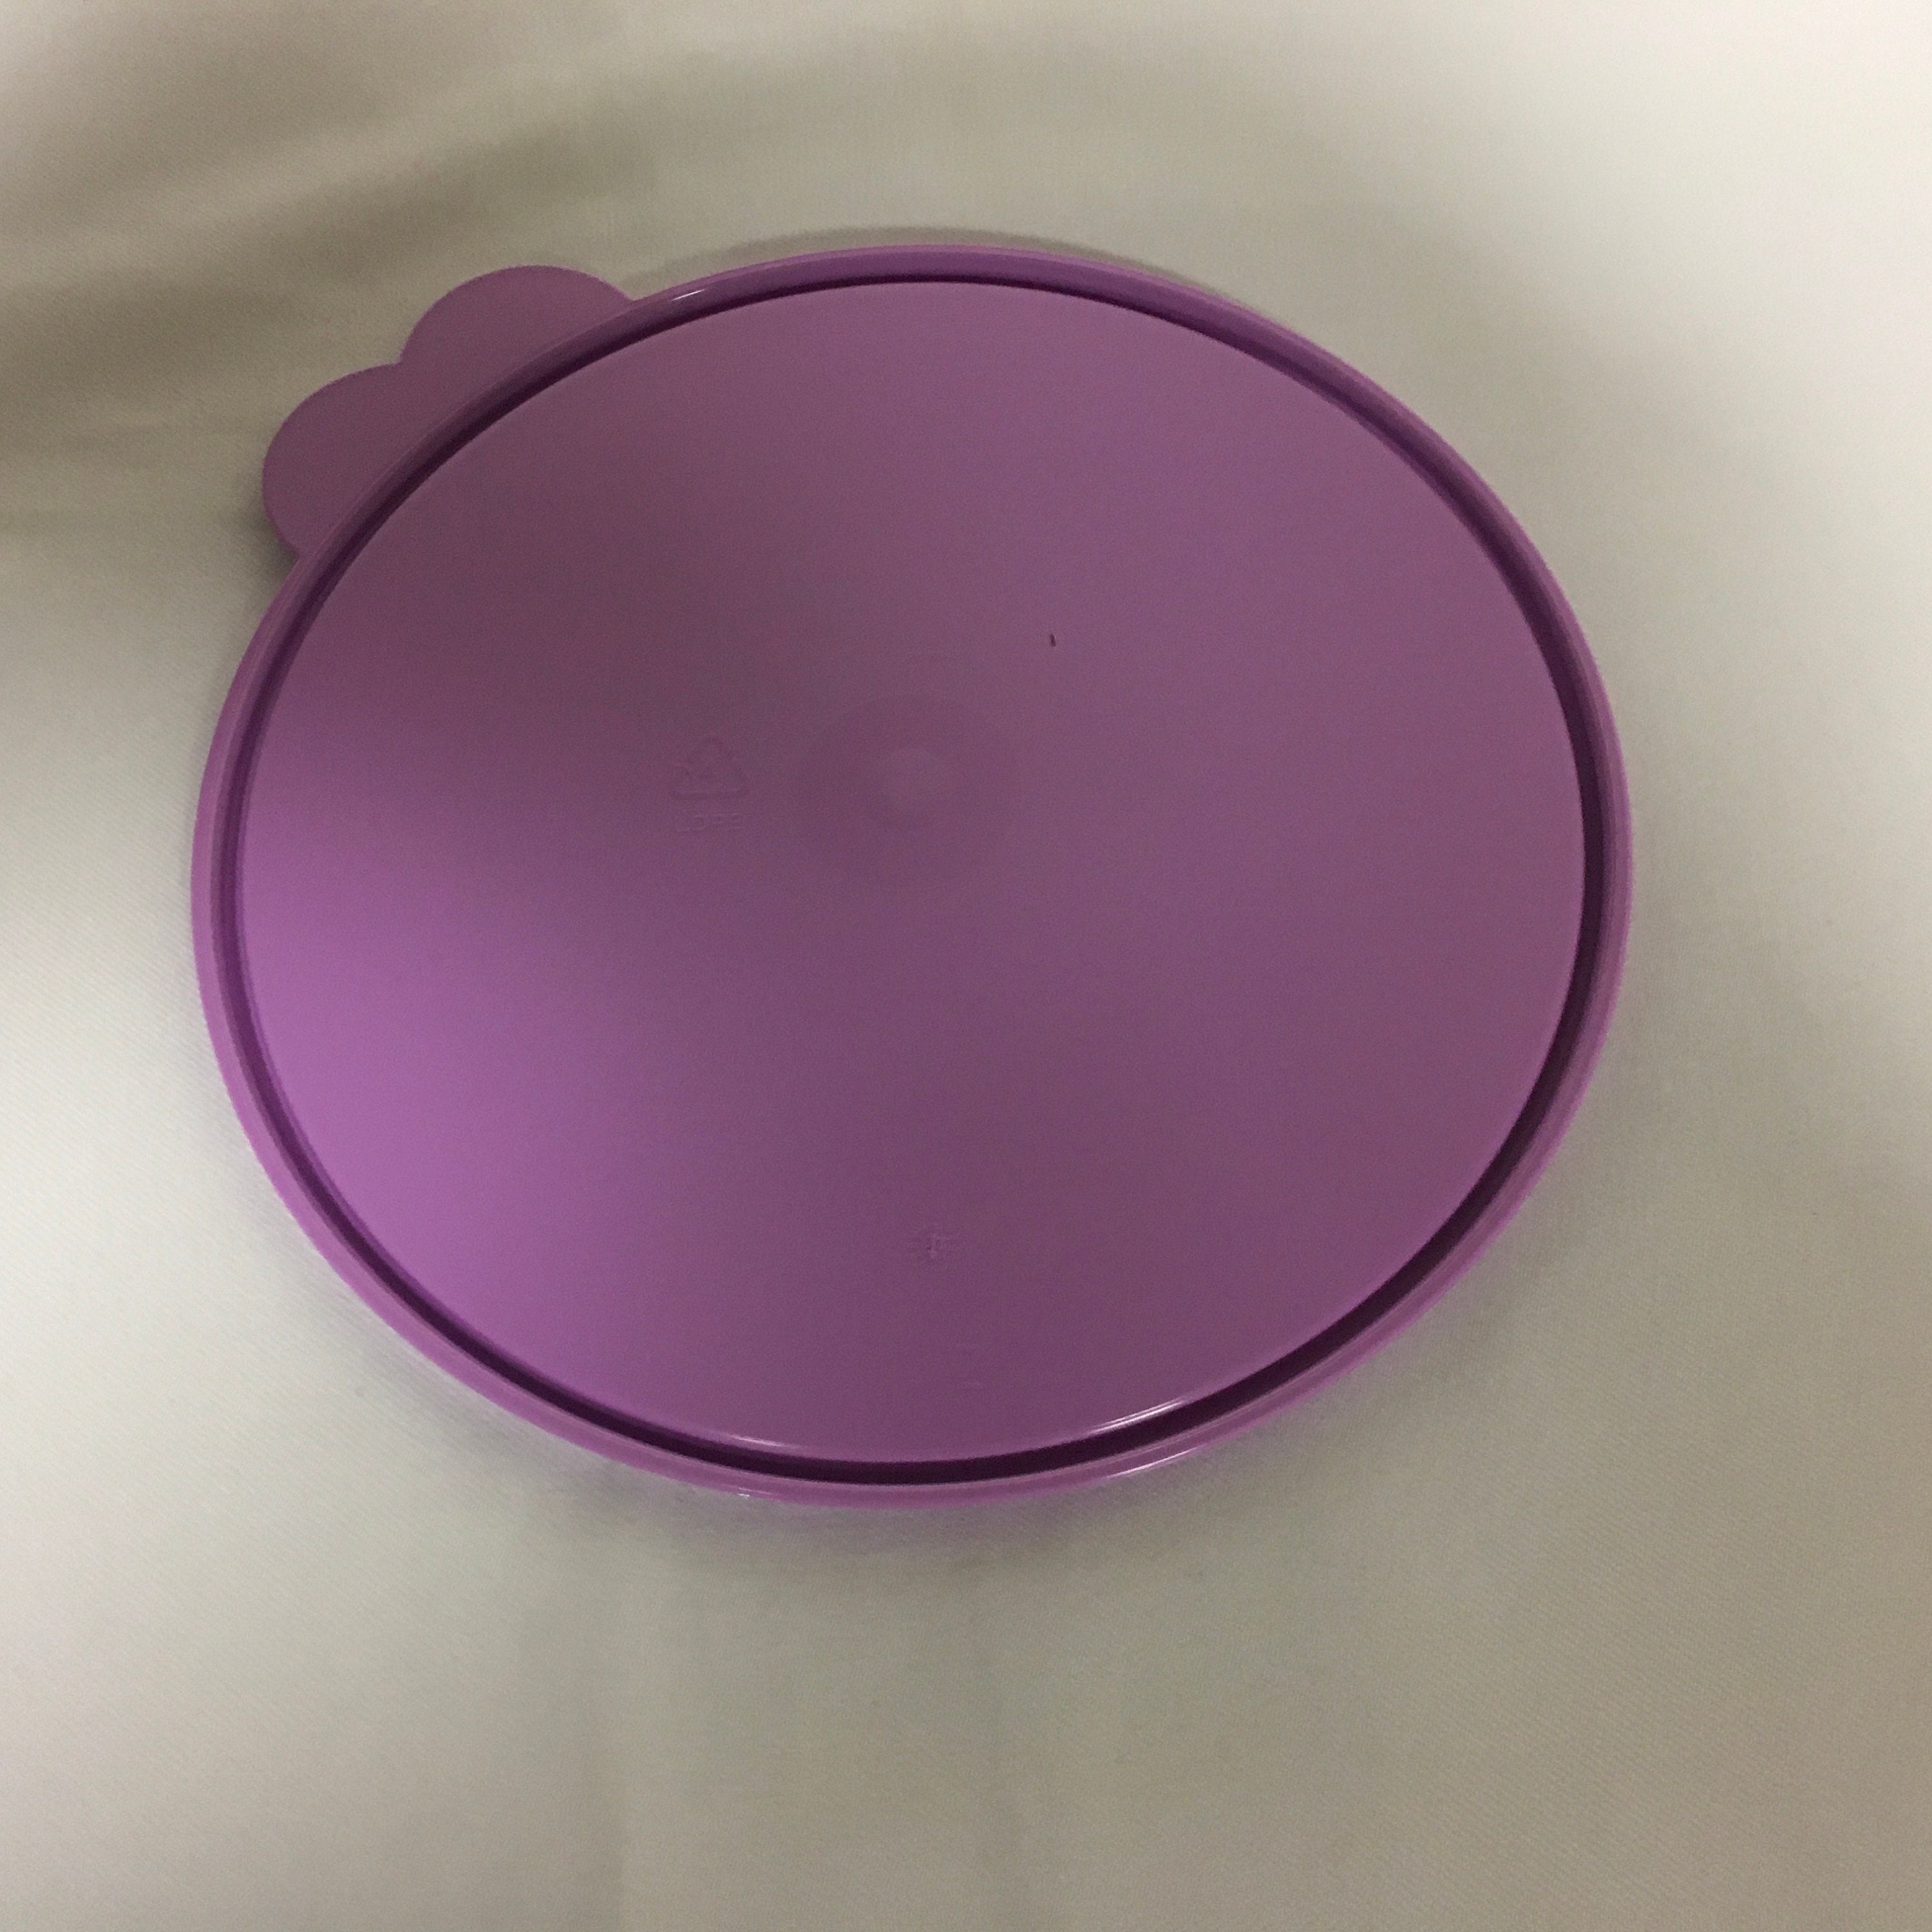 Tupperware Microwave Safe Divided Dish & Sealing Vent Lid Purple Green